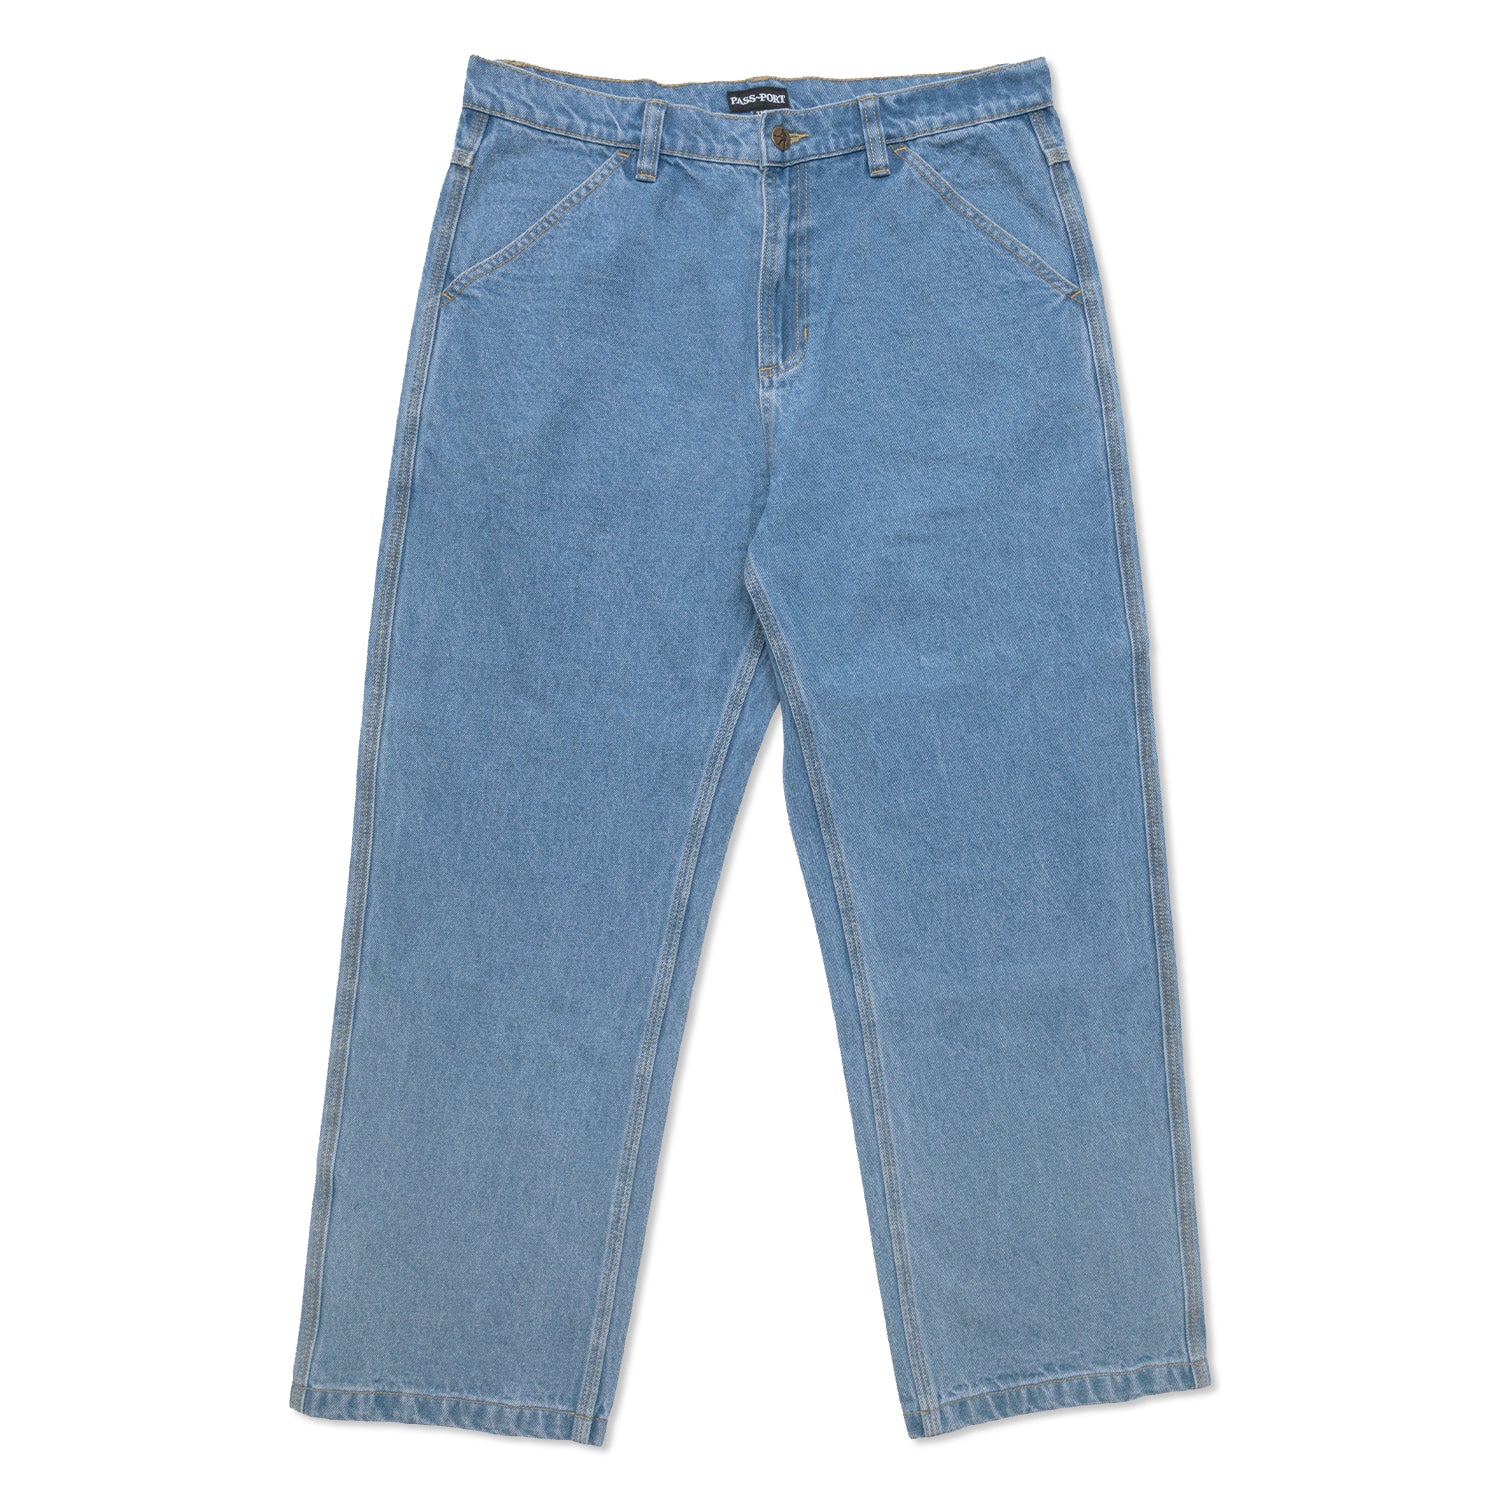 Workers Club Jean, Washed Light Indigo